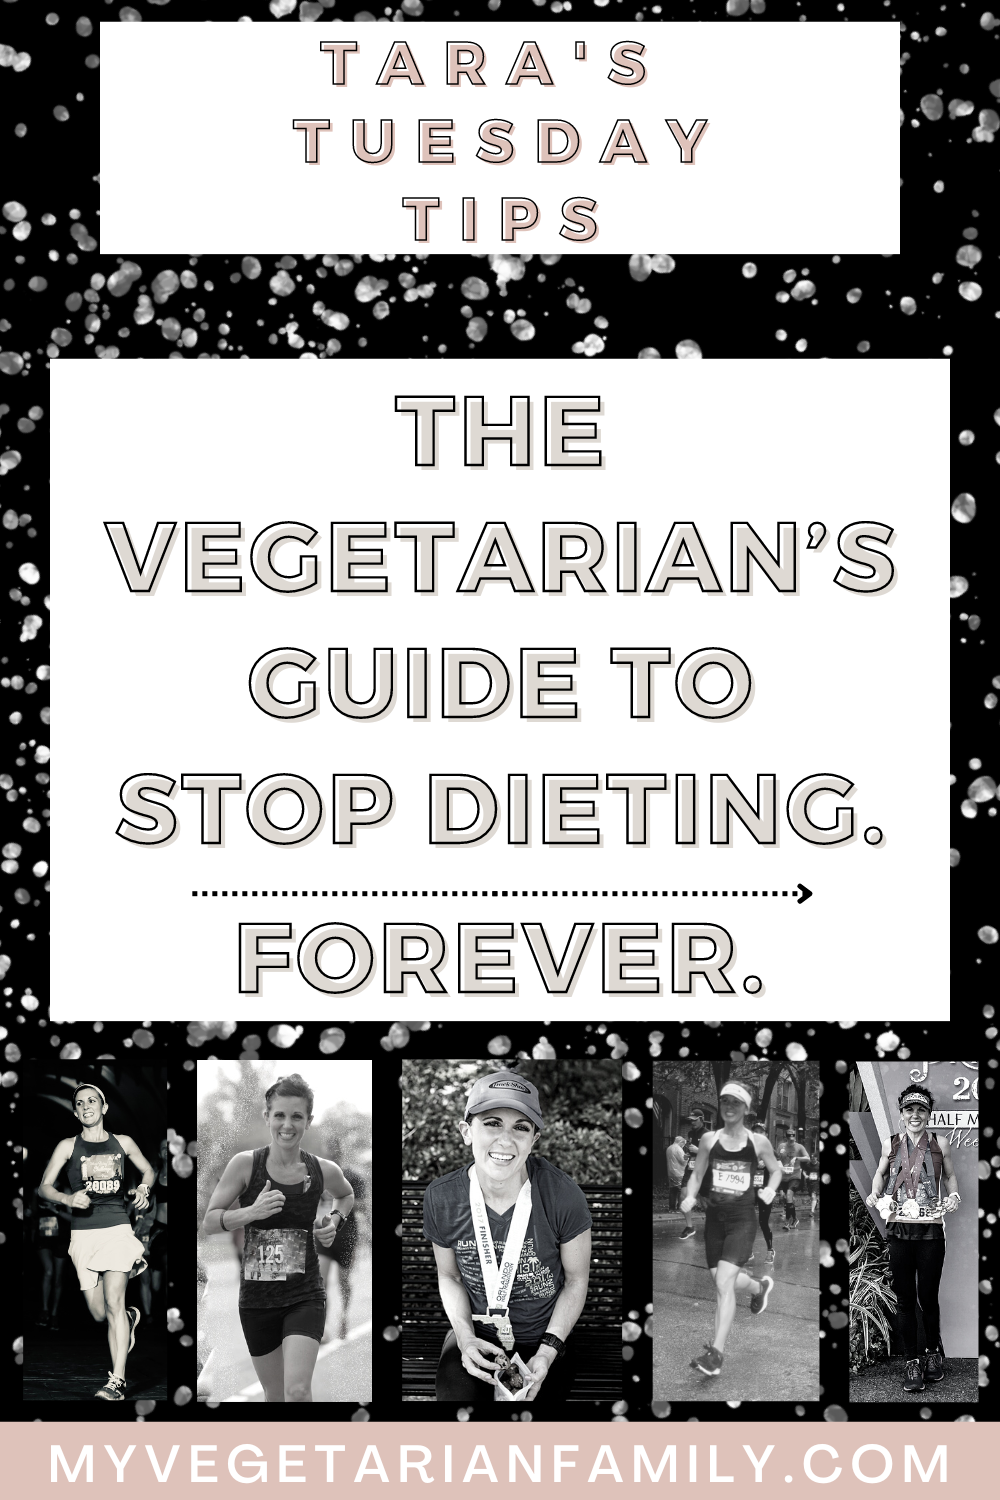 The Vegetarians Guide to Stop Dieting Forever | My Vegetarian Family | Tara's Tuesday Tips #stopdieting #tarastuesdaytips